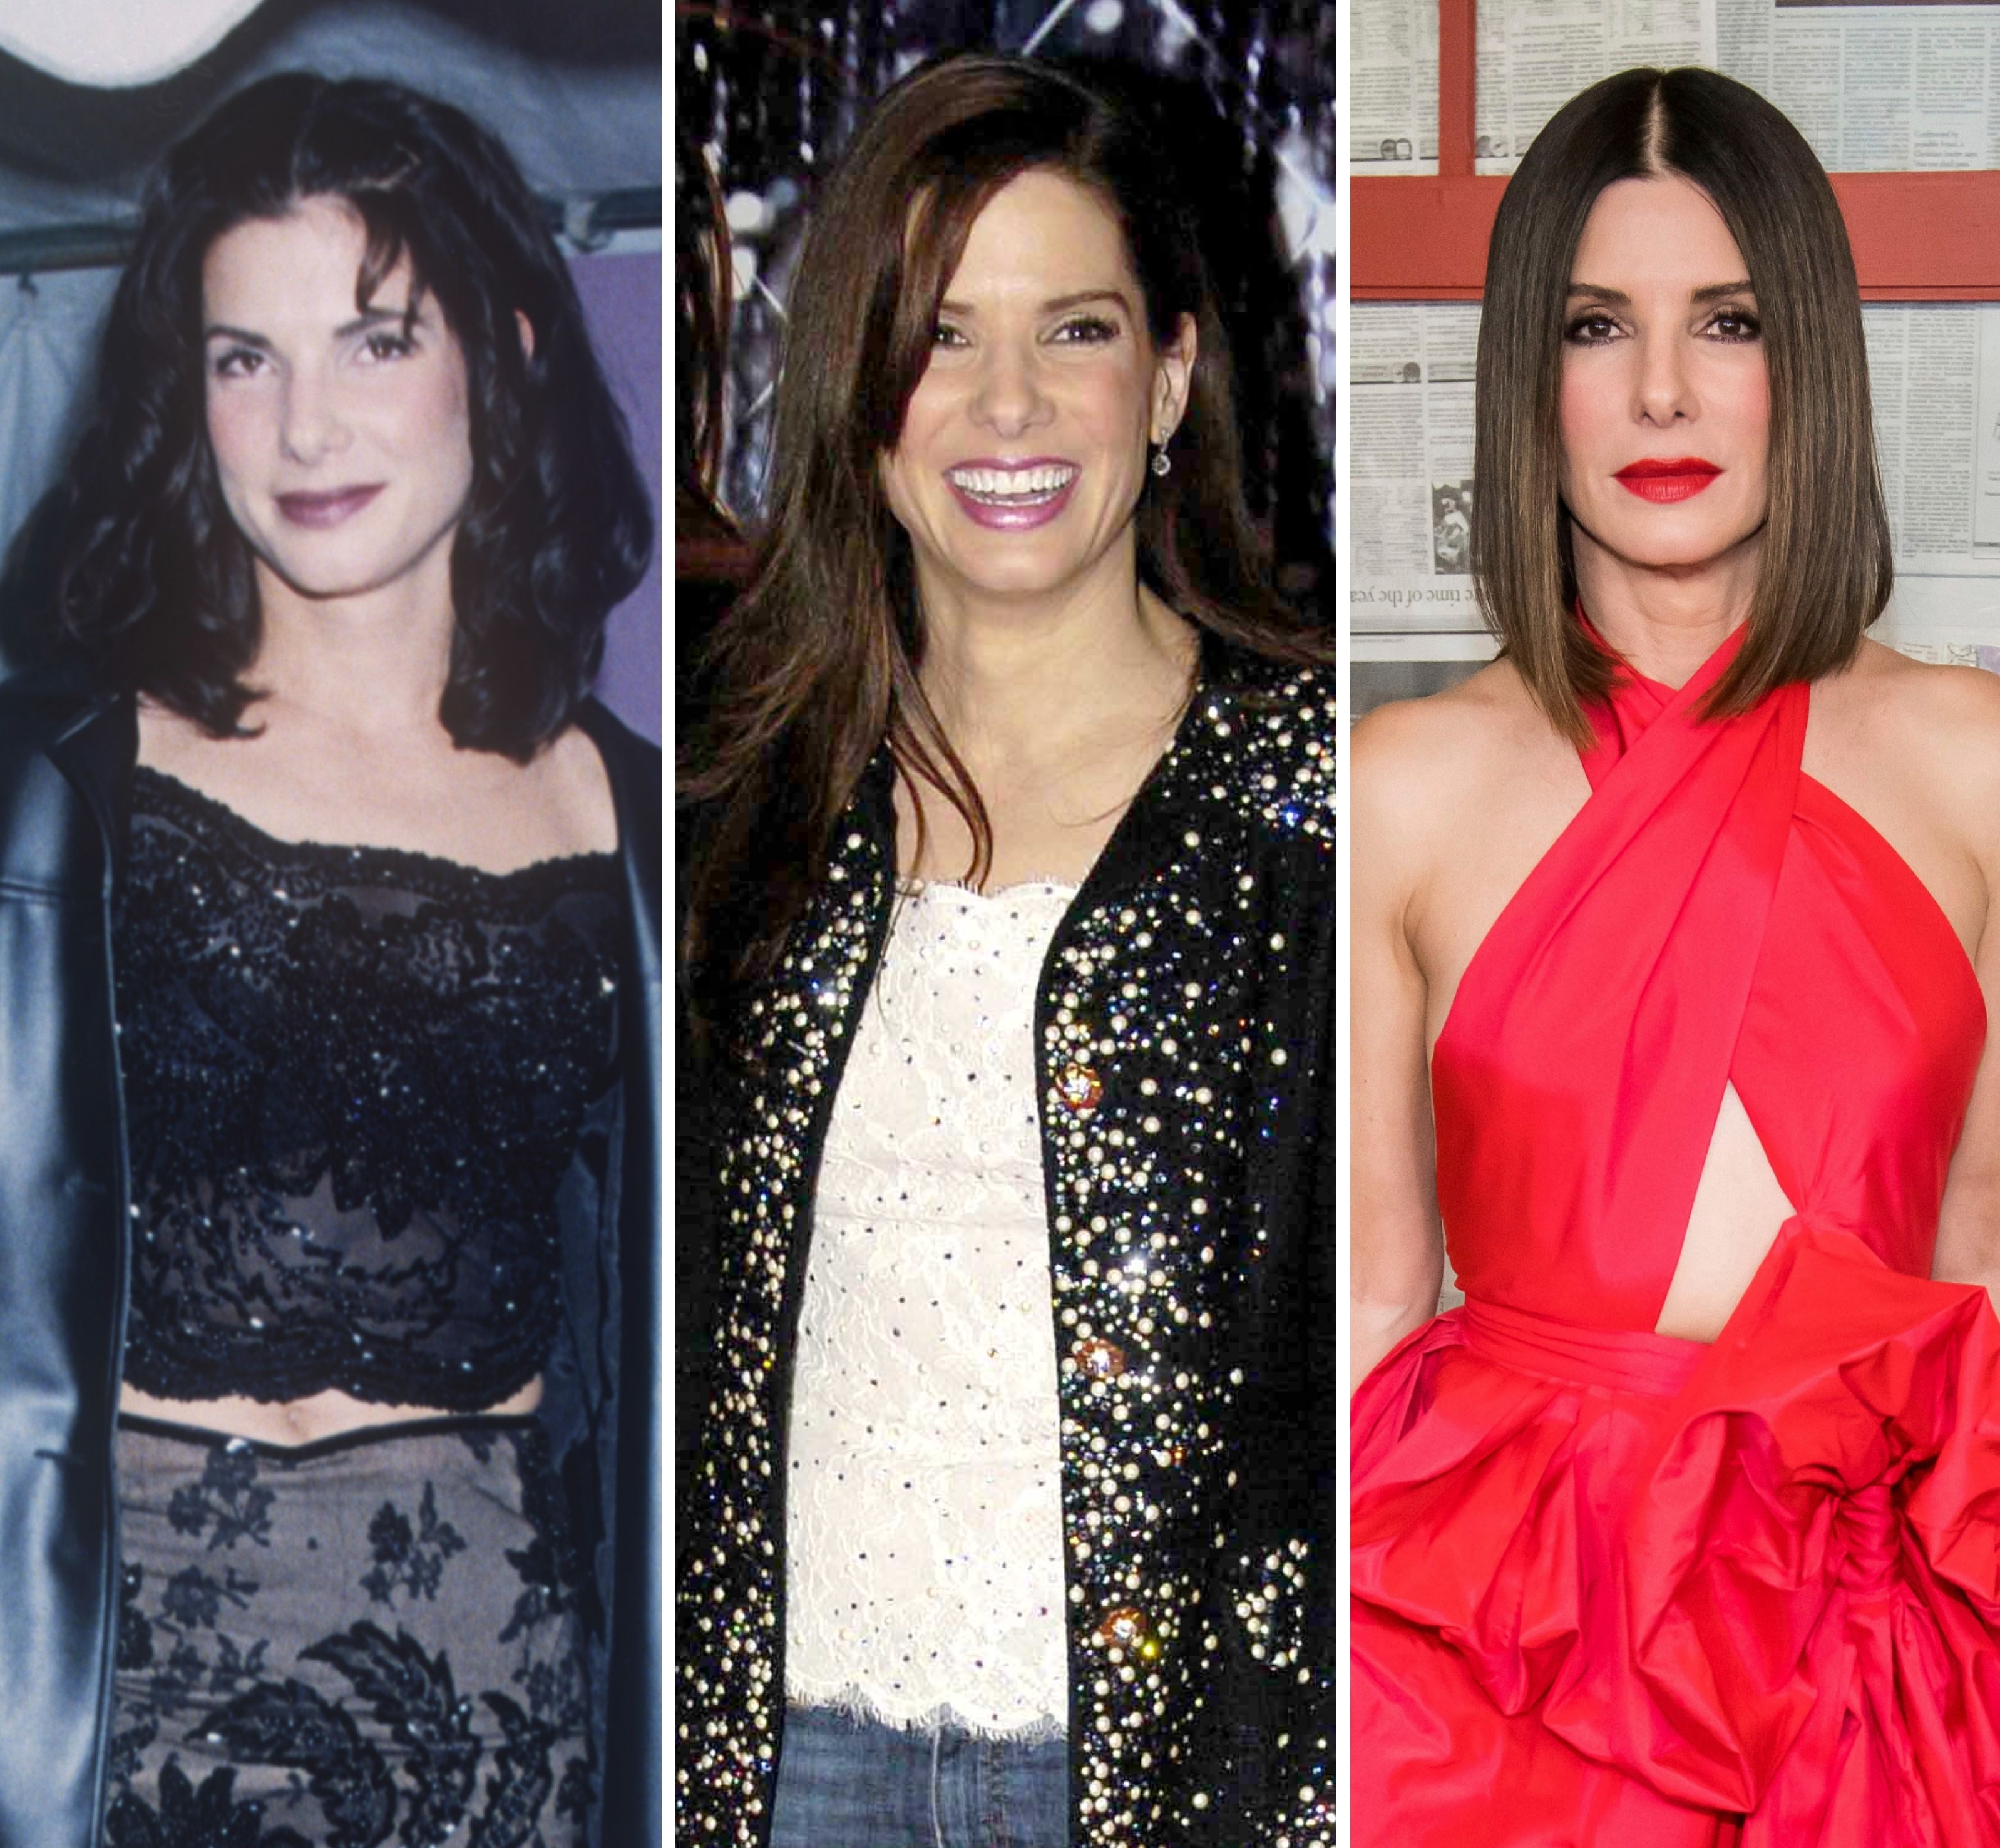 https://www.closerweekly.com/wp-content/uploads/2019/08/sandra-bullock-then-and-now-see-the-actress-transformation10.jpg?fit=3195%2C2952&quality=86&strip=all